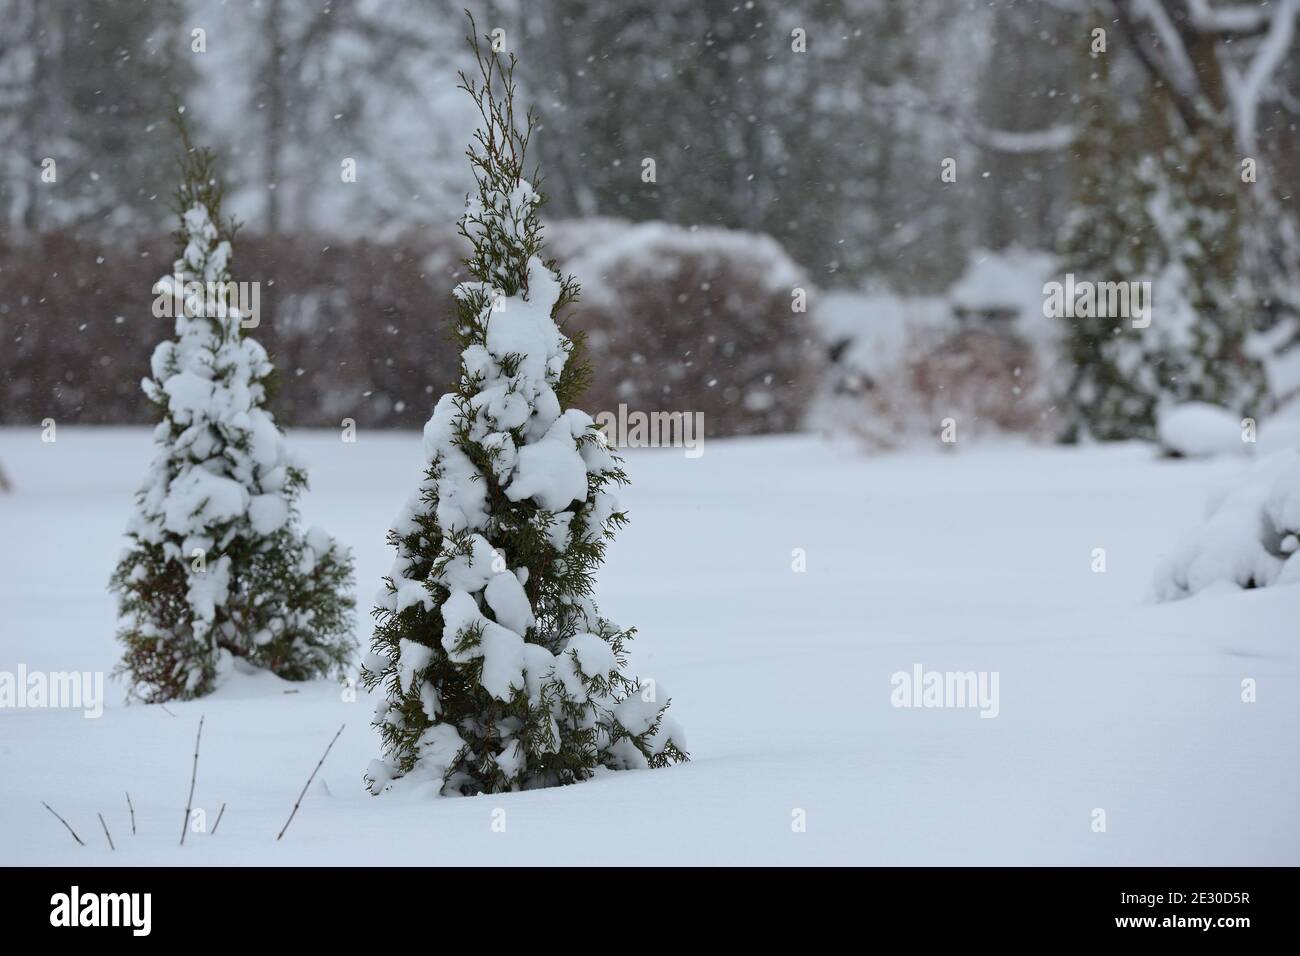 Snow covered small thuja plants in a garden Stock Photo